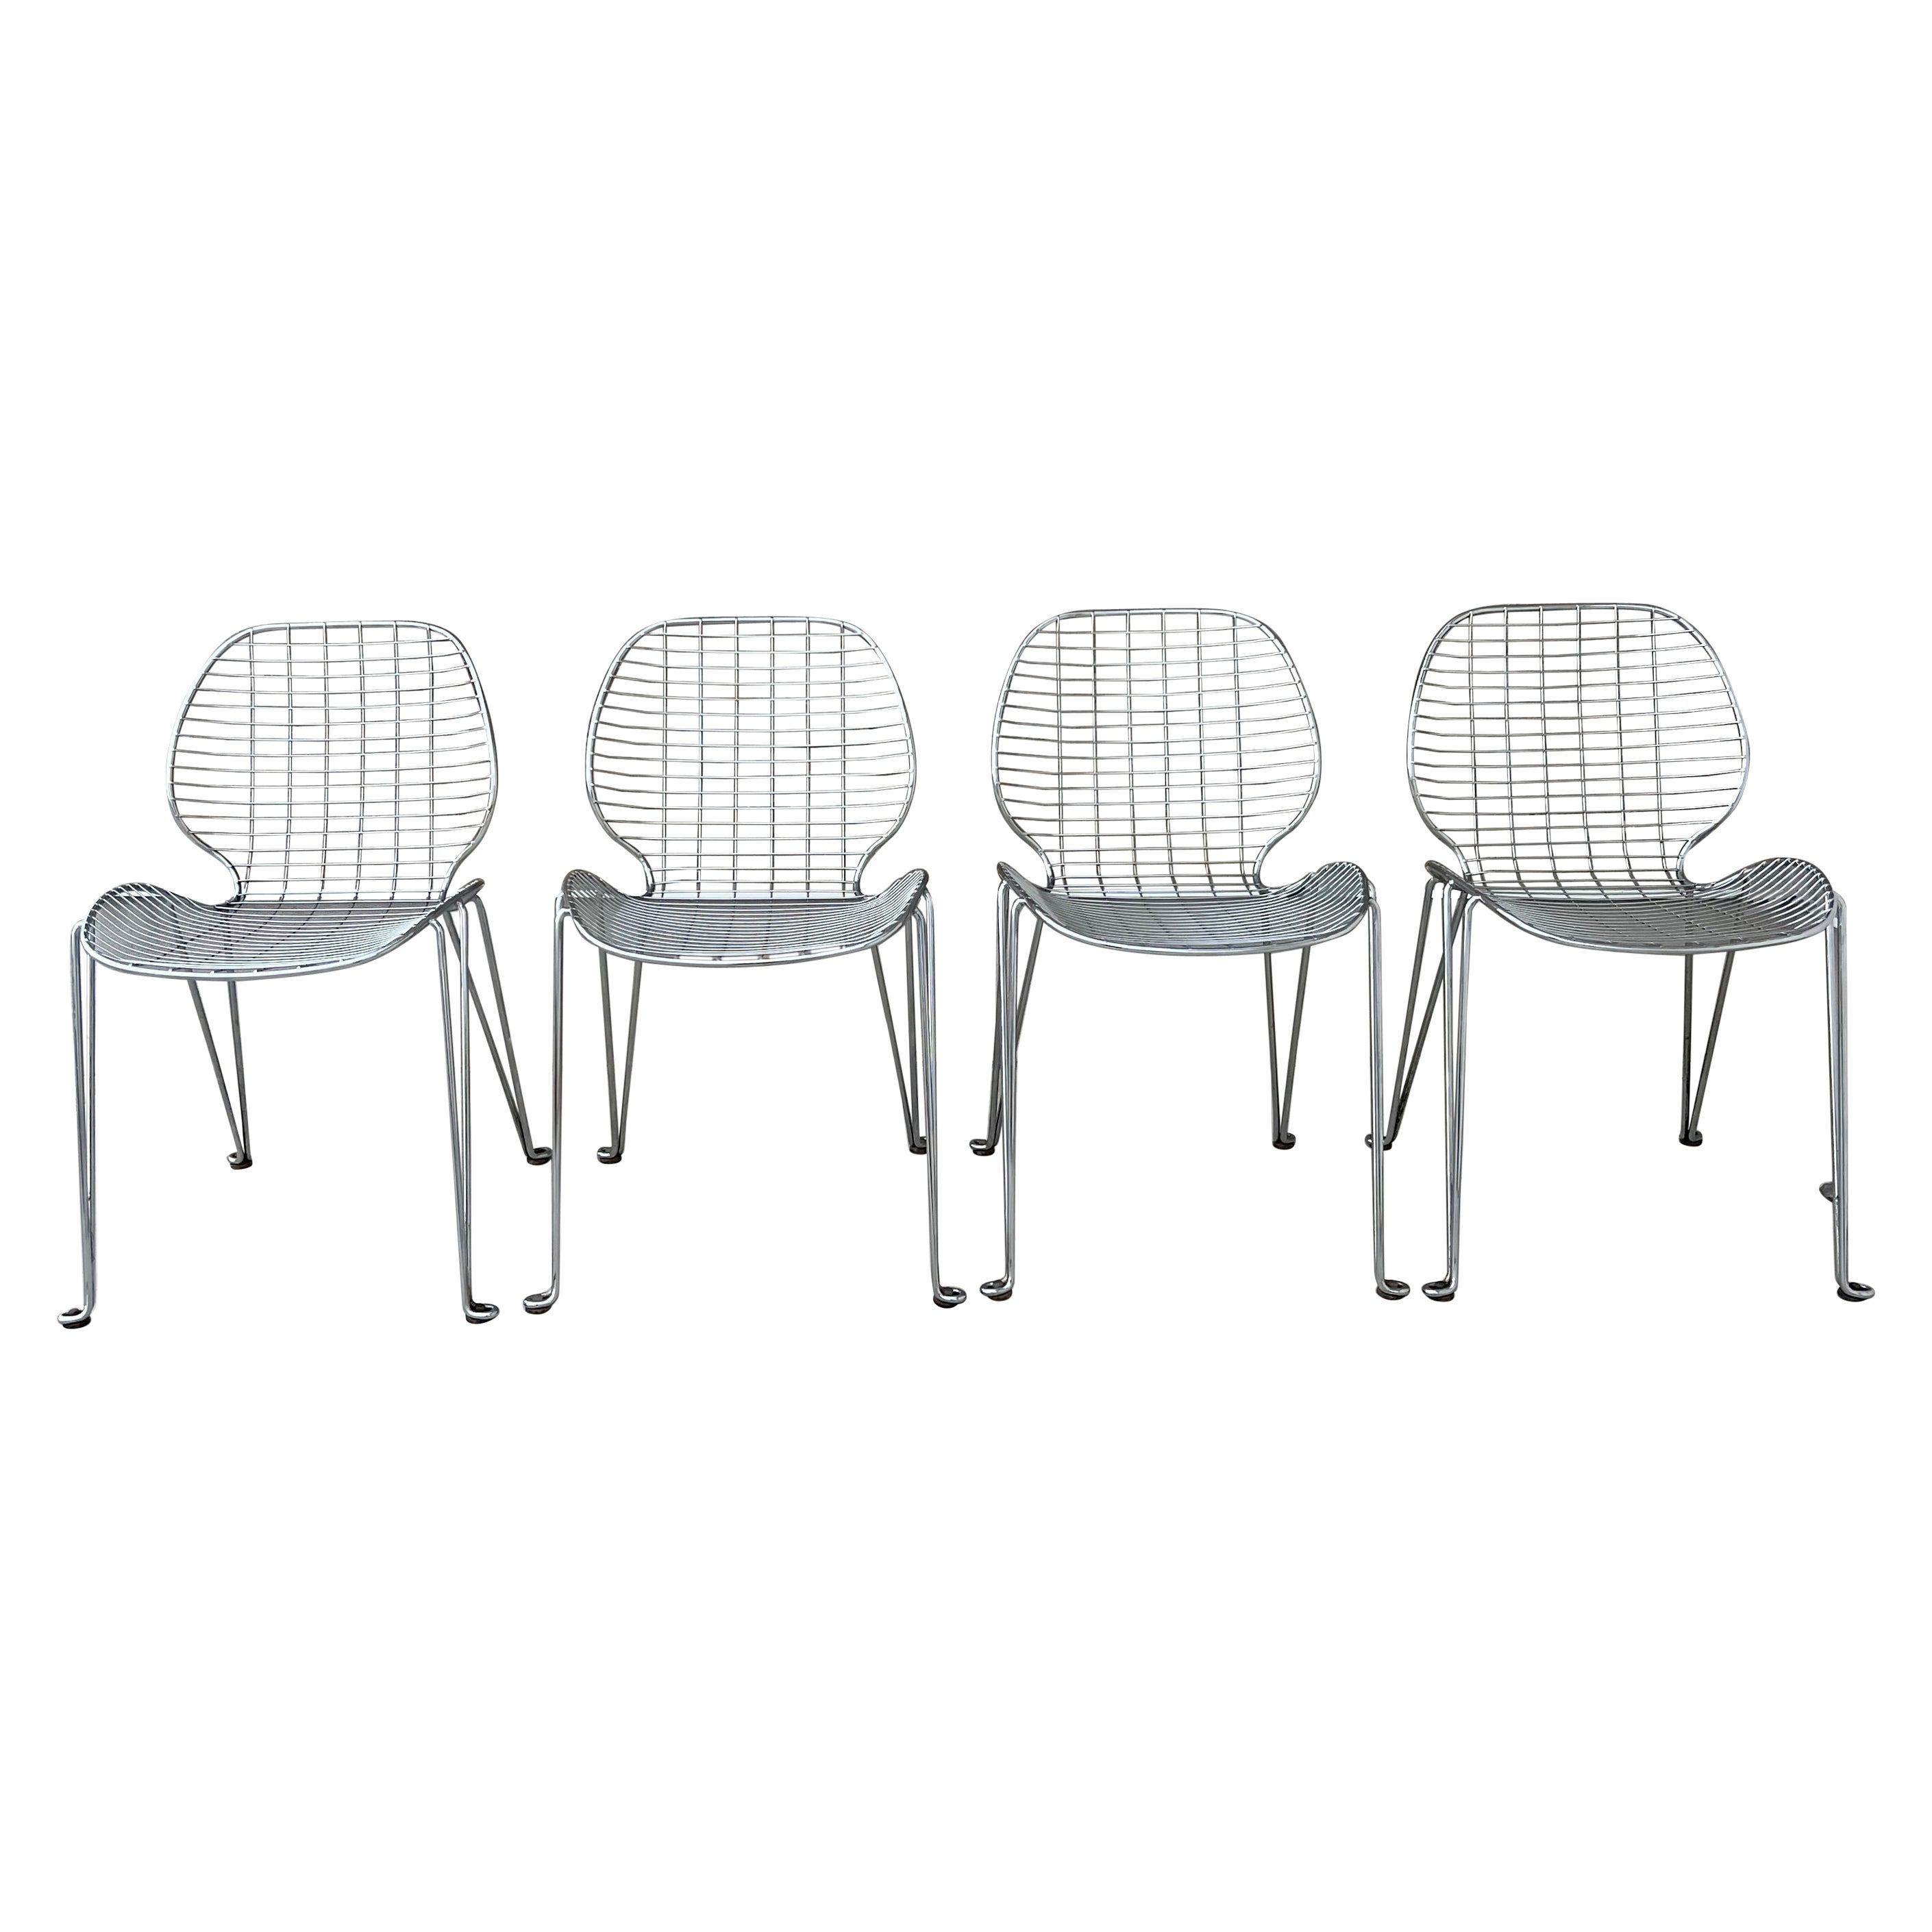 Vintage Metal Wire Chairs With Hairpin Legs - Set of Four For Sale